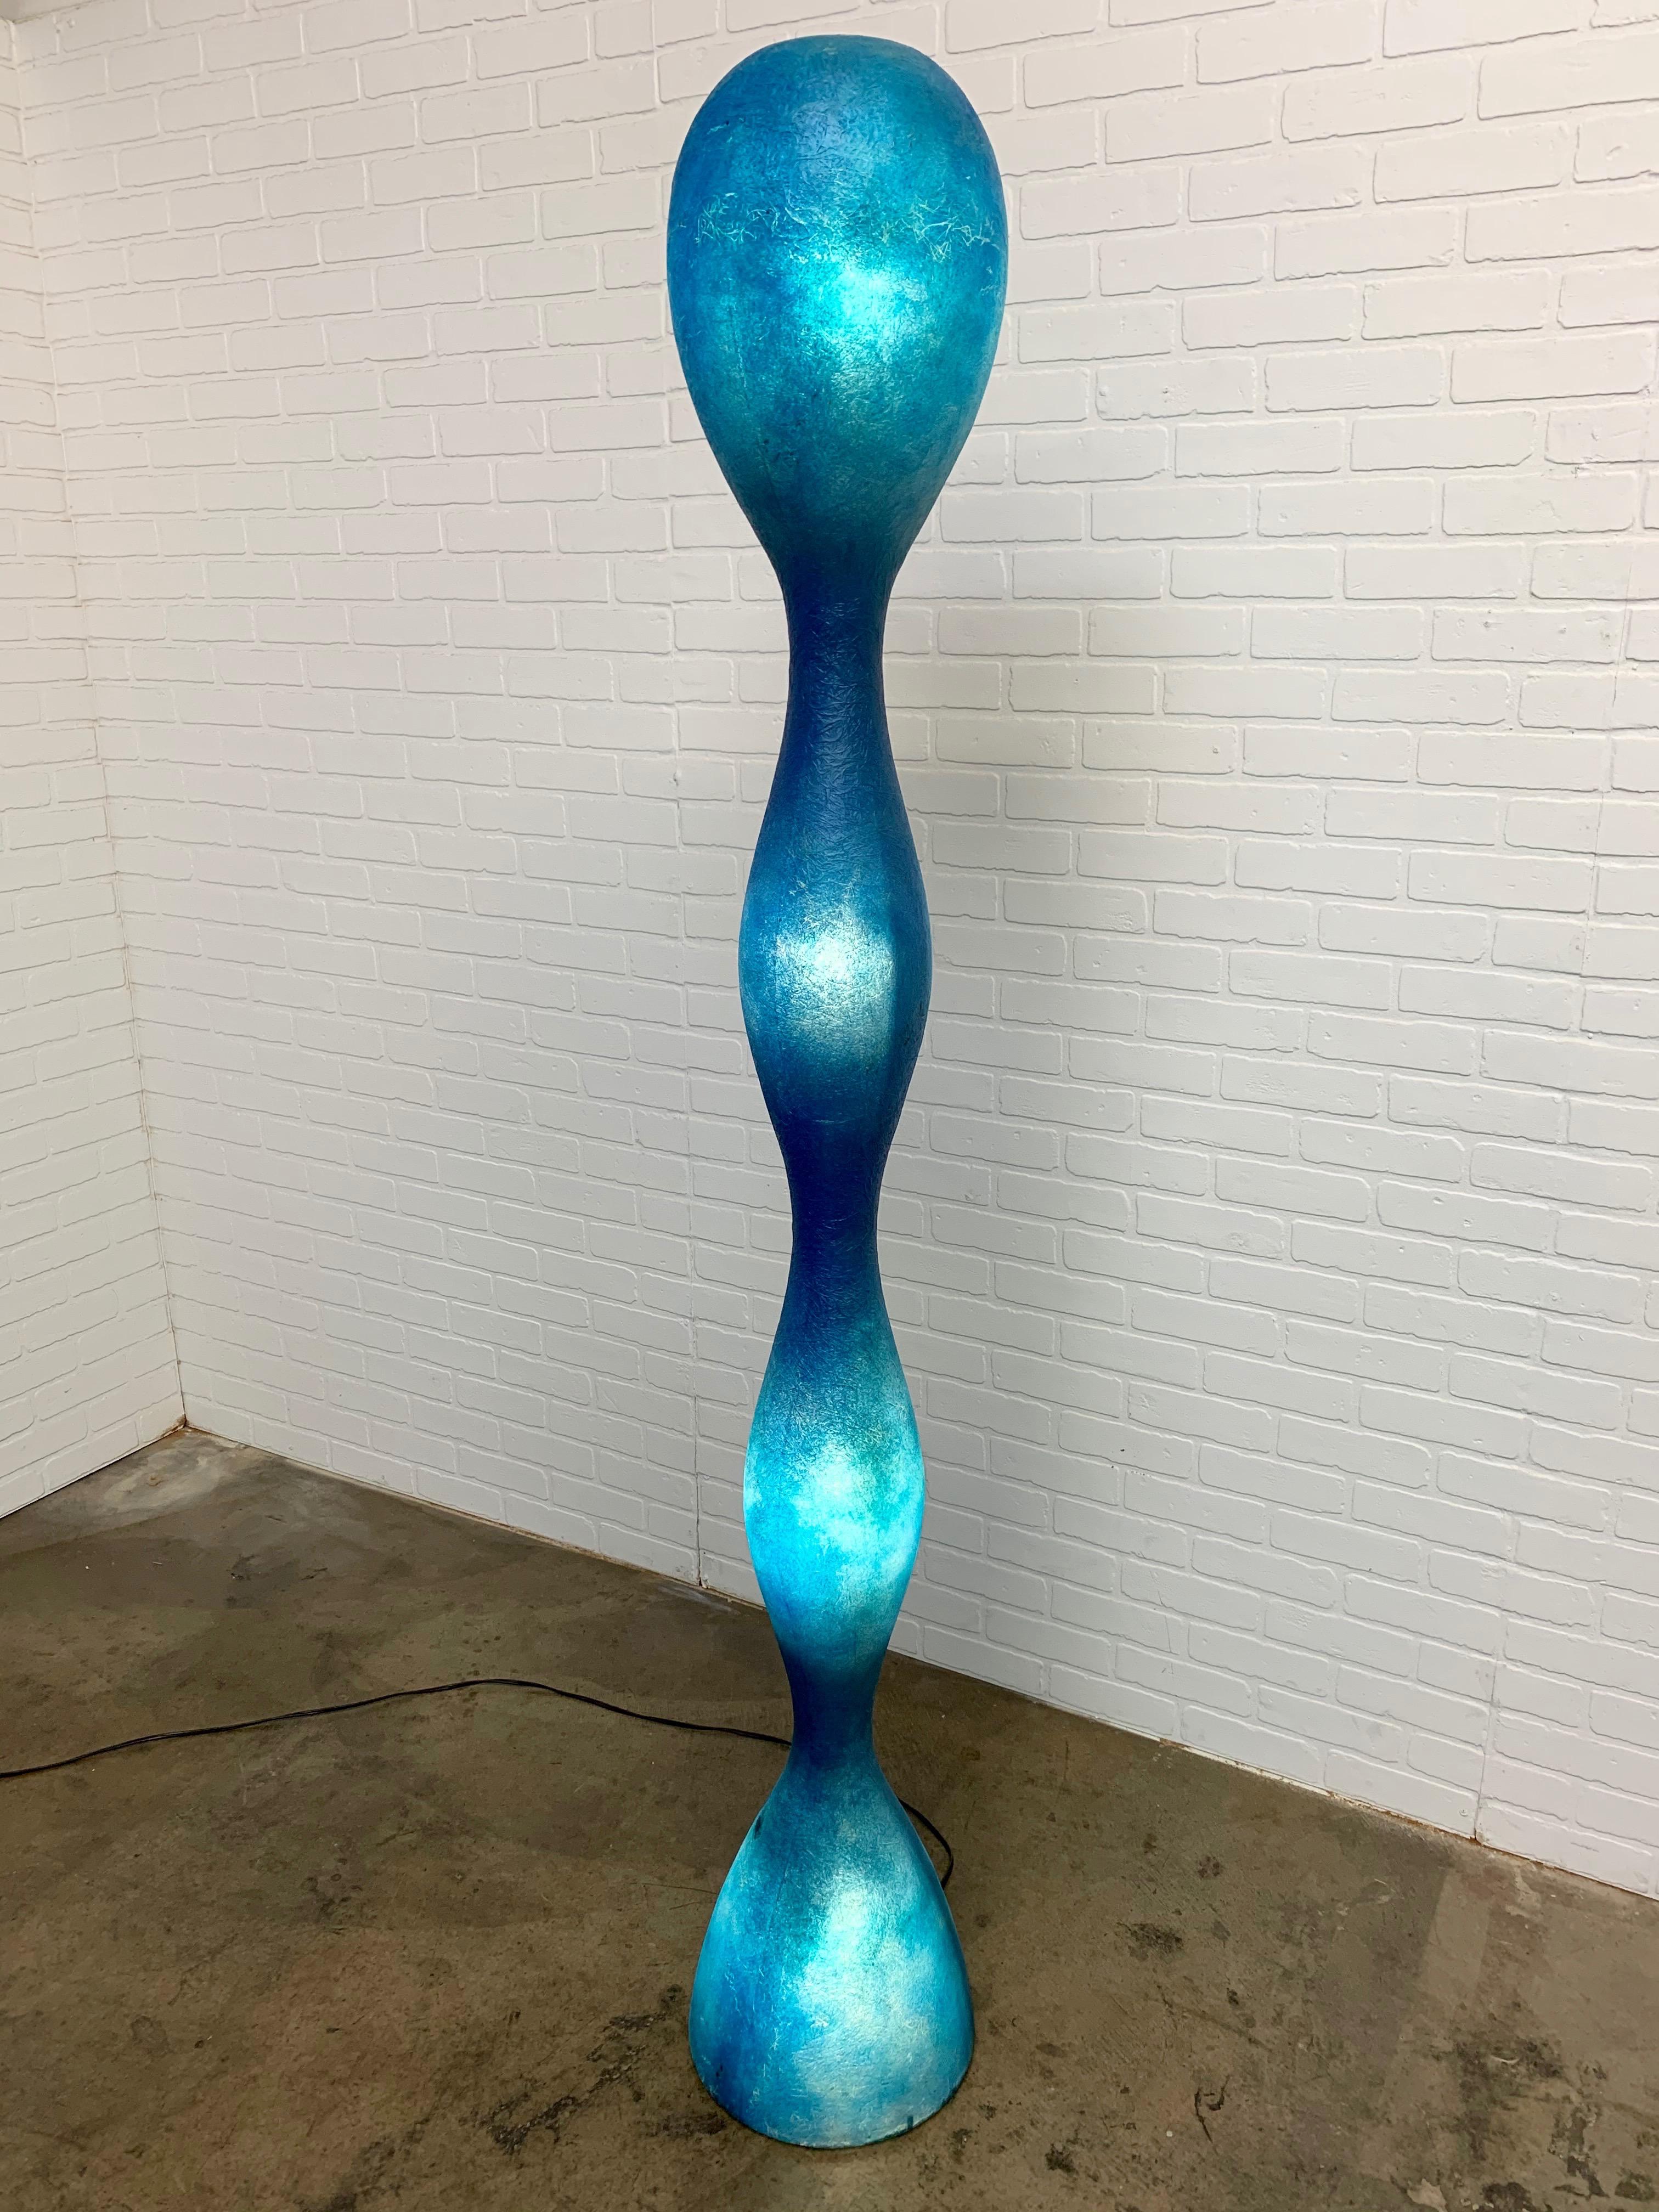 Illuminated blue sculpted fiberglass floor lamp by Guglielmo Berchicci for Kundalini
These were originally purchased for a prop house in Los Angeles. Seen in many Hollywood productions.
  